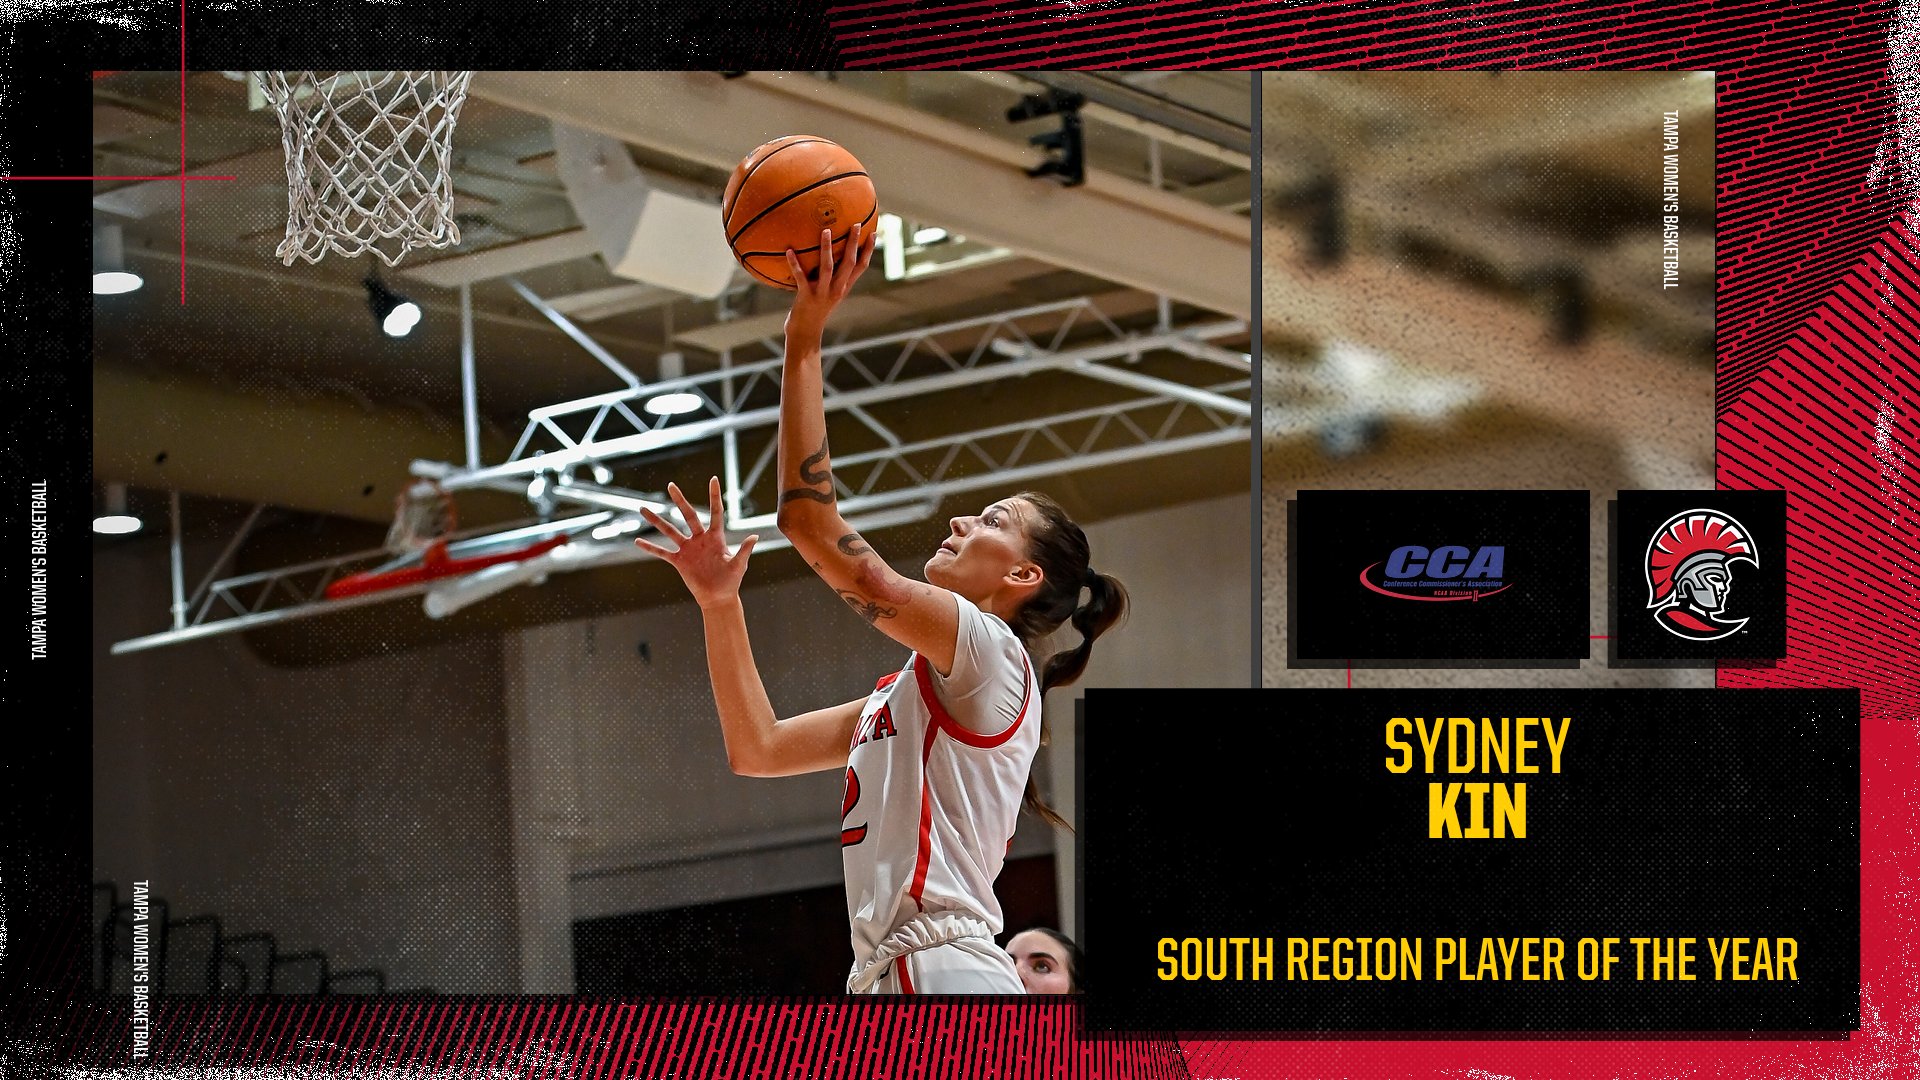 Sydney Kin Named South Region Player of the Year